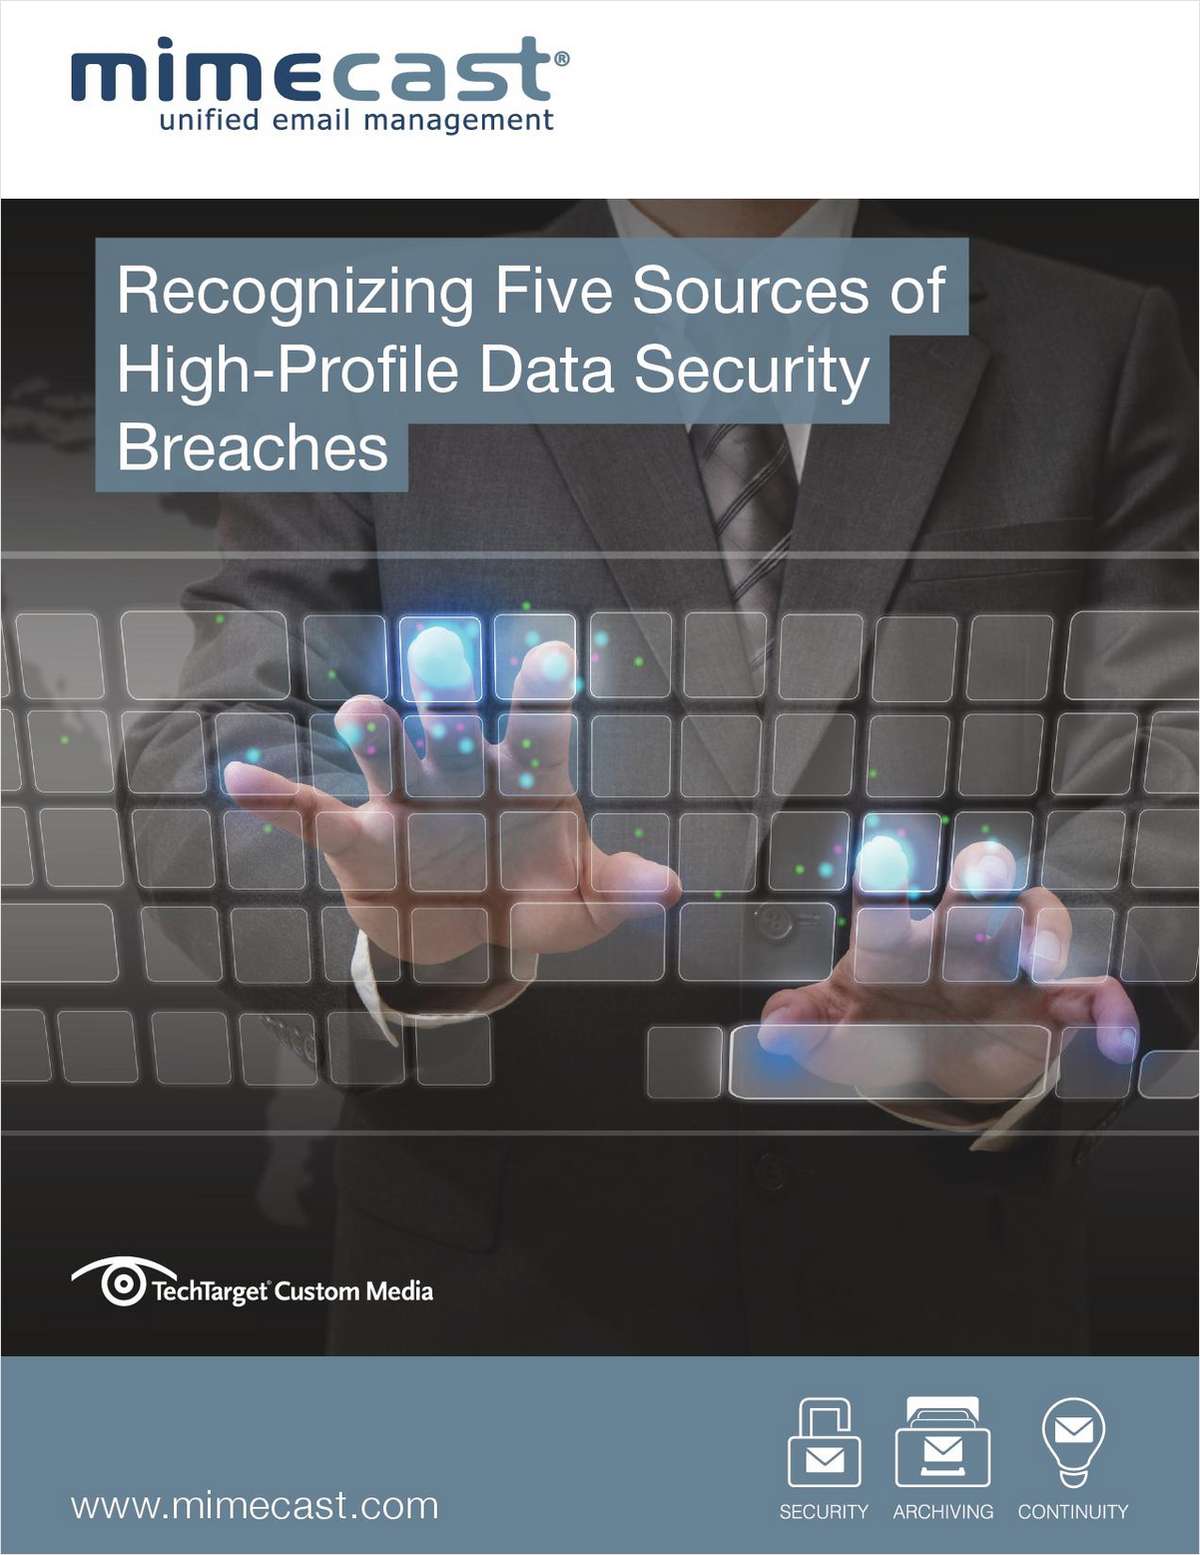 Recognizing Five Sources of High-Profile Data Security Breaches